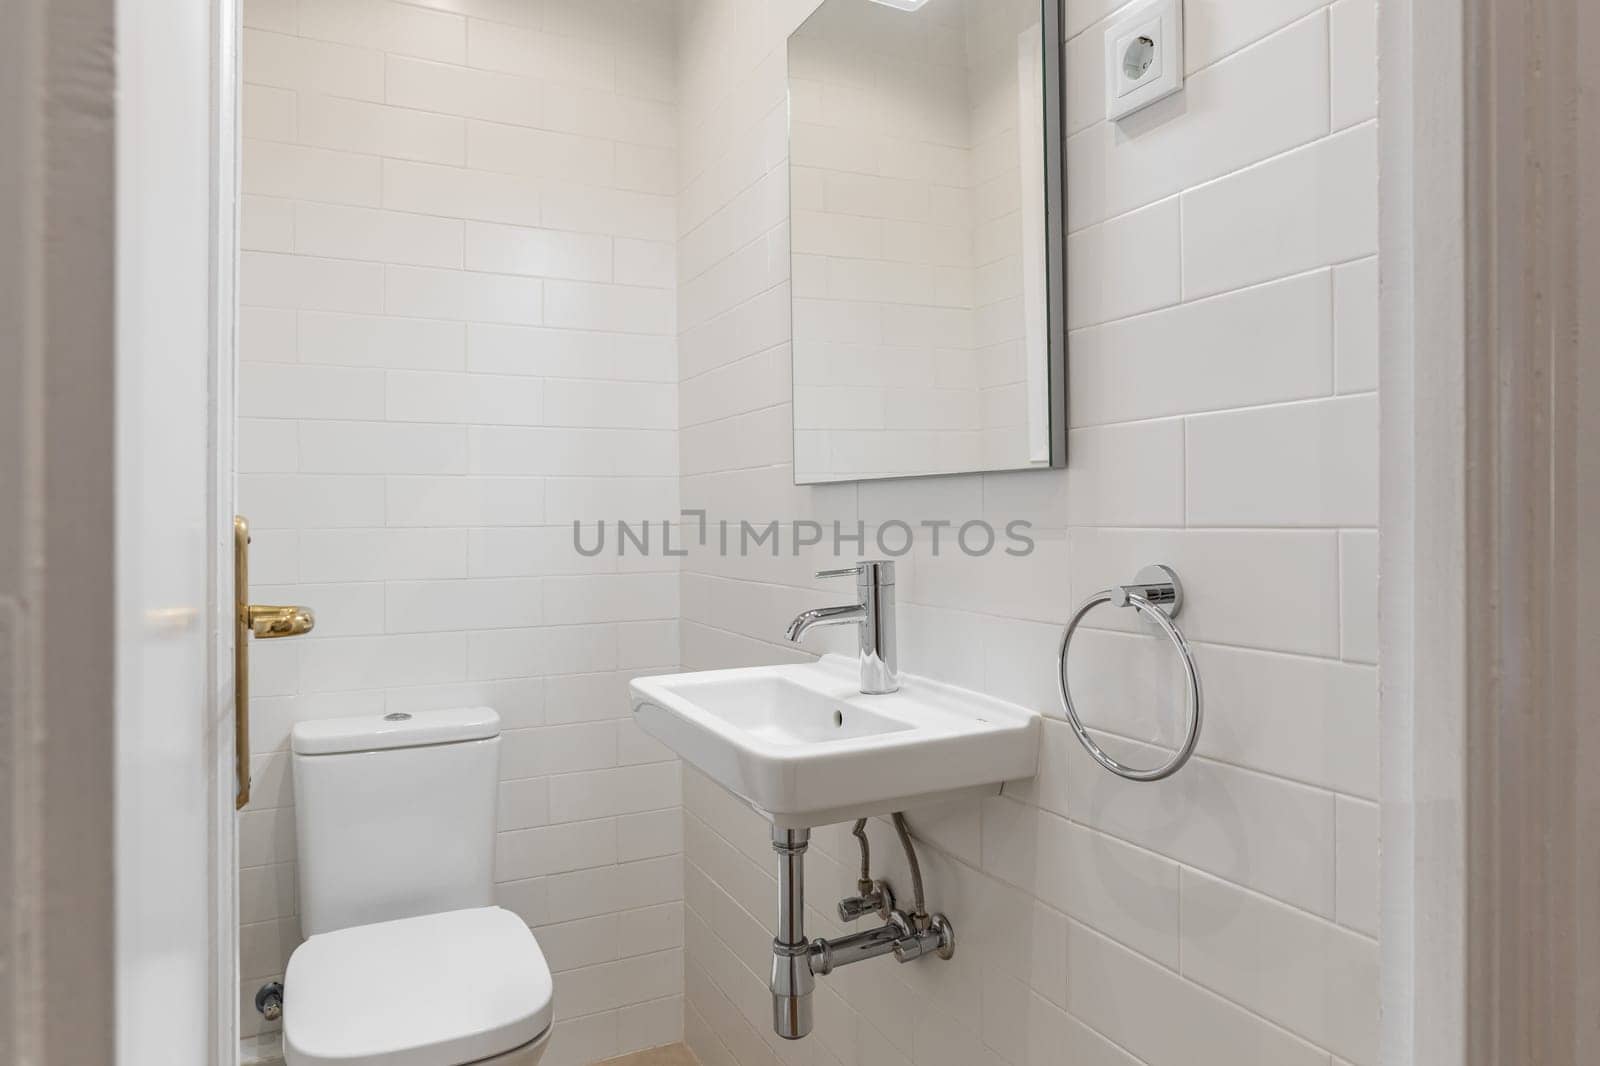 Compact and clean bathroom space with white subway tiles, modern sink, and silver fixtures.